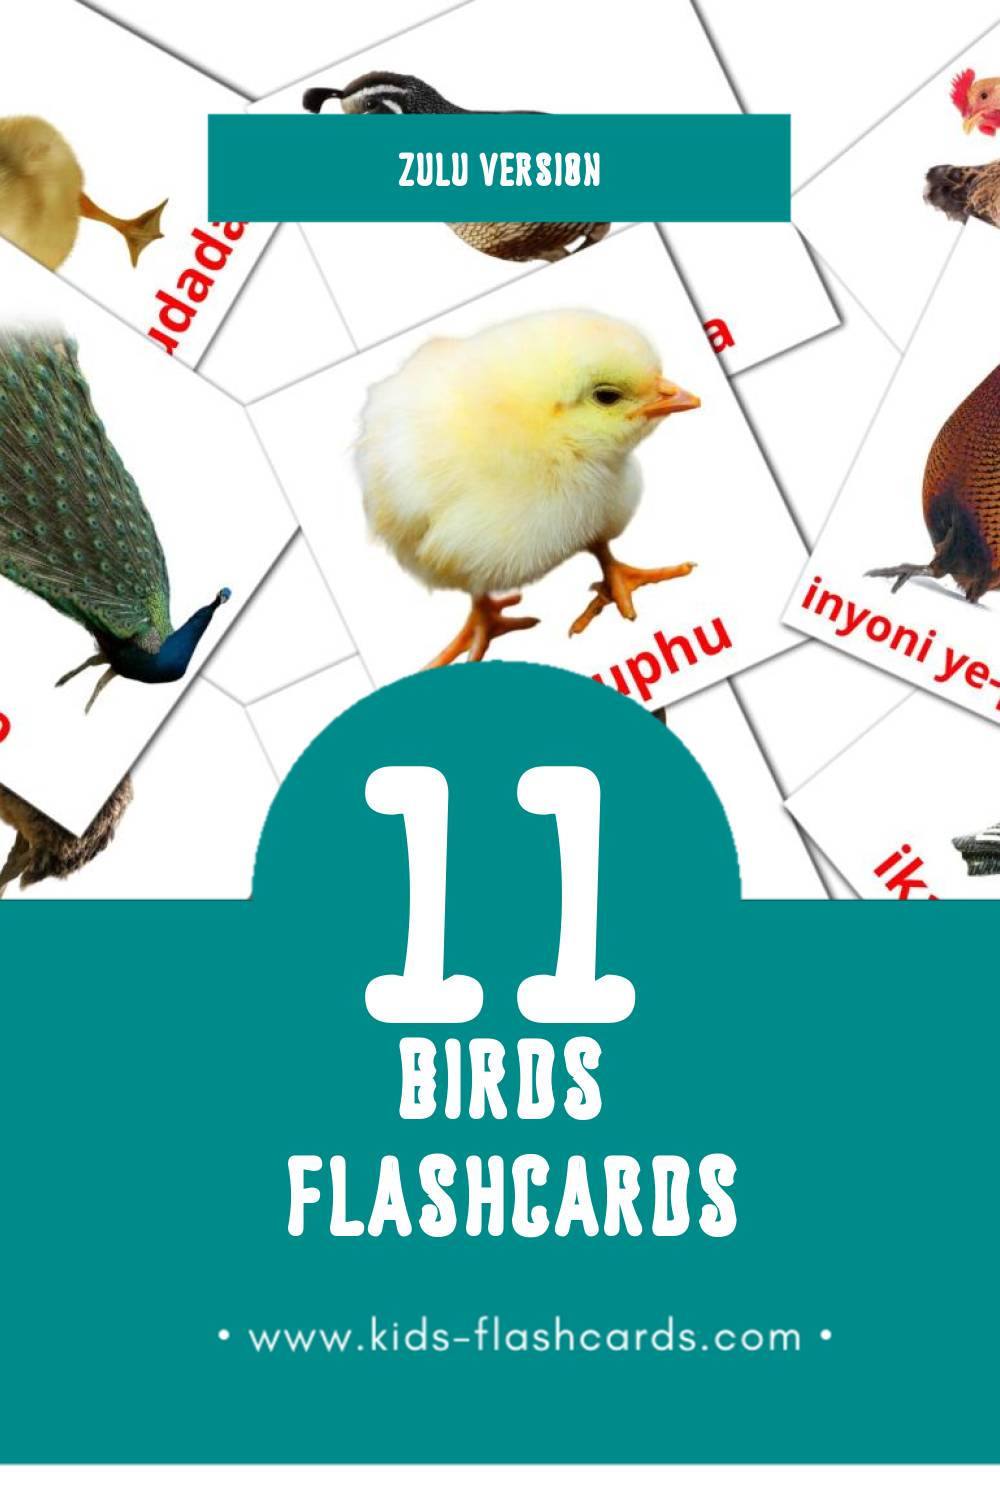 Visual Inyoni Flashcards for Toddlers (11 cards in Zulu)